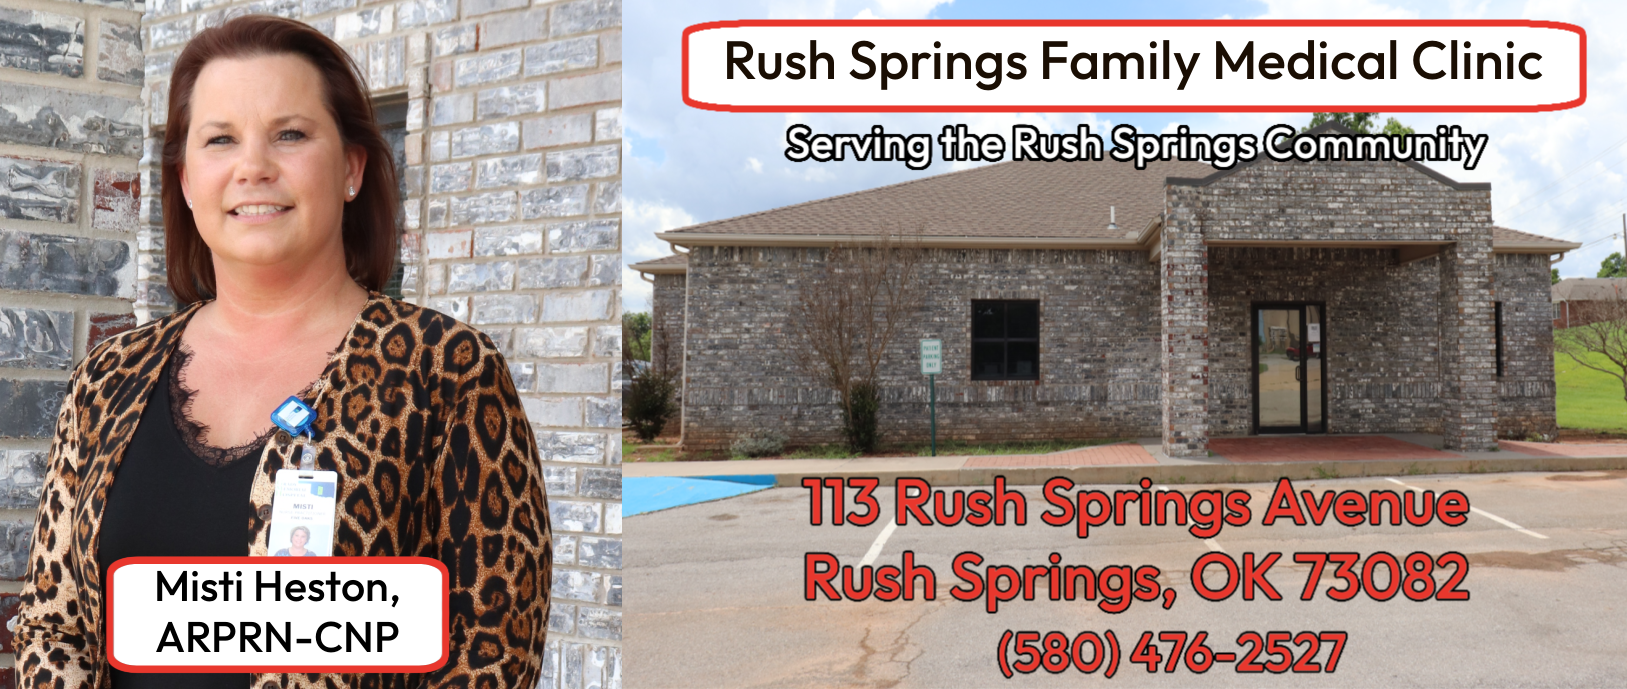 Banner picture of Misti Heston, ARPRN-CNP, smiling and a picture of the front entrance of Rush Springs Family Medical Clinic. Banner says:

Serving The Rush Springs Community

113 Rush Springs Avenue
Rush Springs, OK 73082
(580) 476-2527